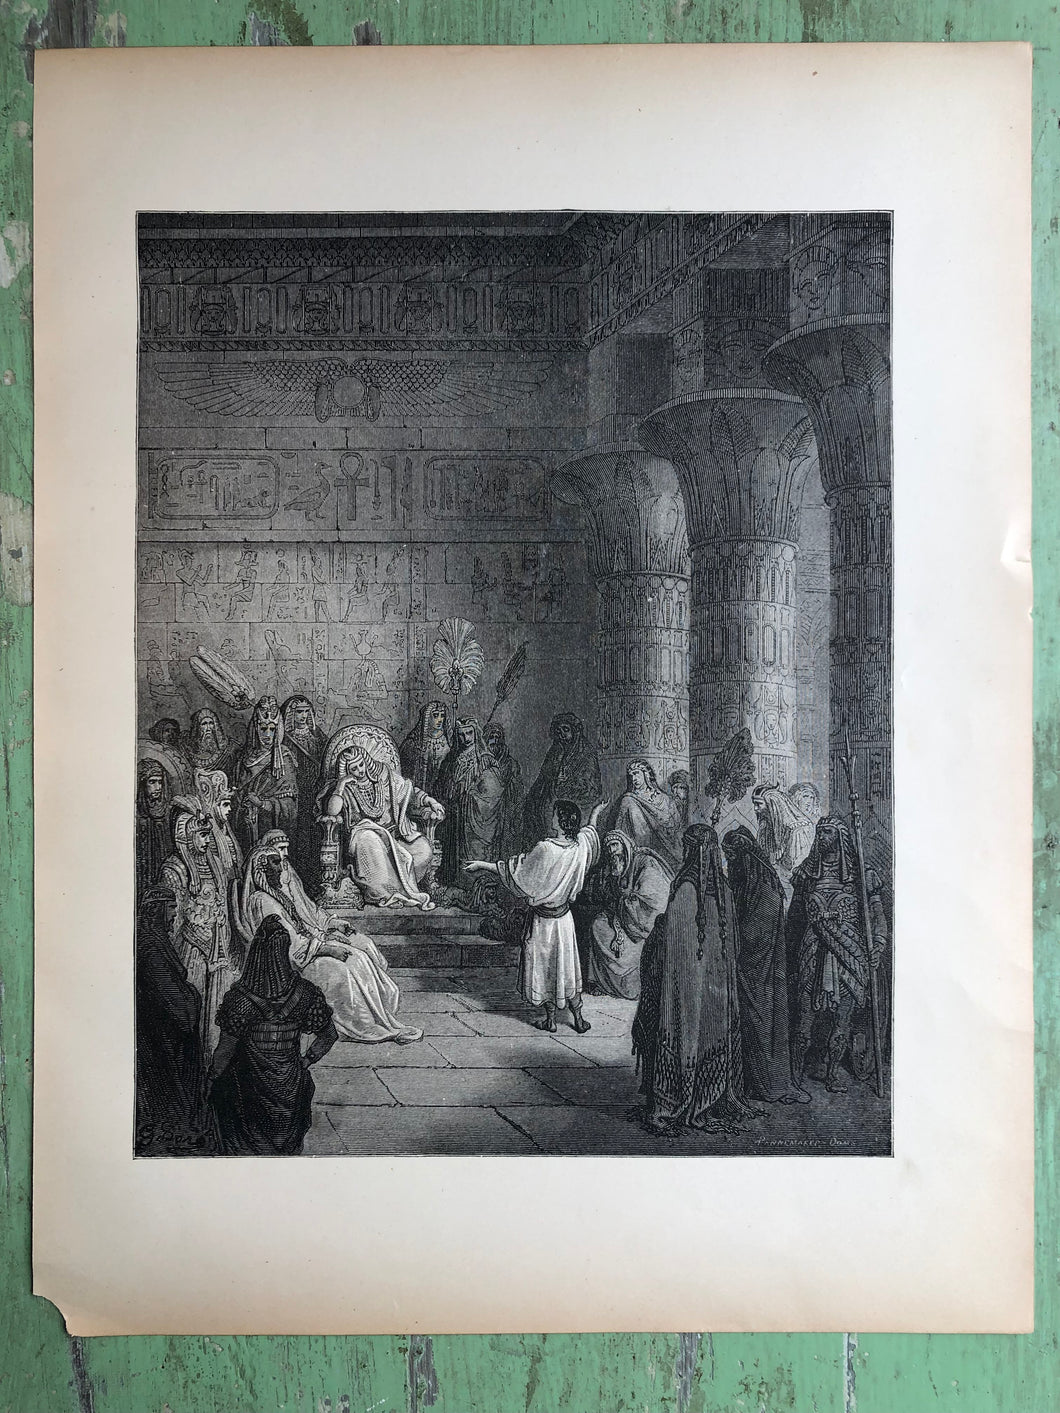 Joseph Interpreting Pharaoh's Dream. Print from The Dore Bible Gallery by Gustave Dore